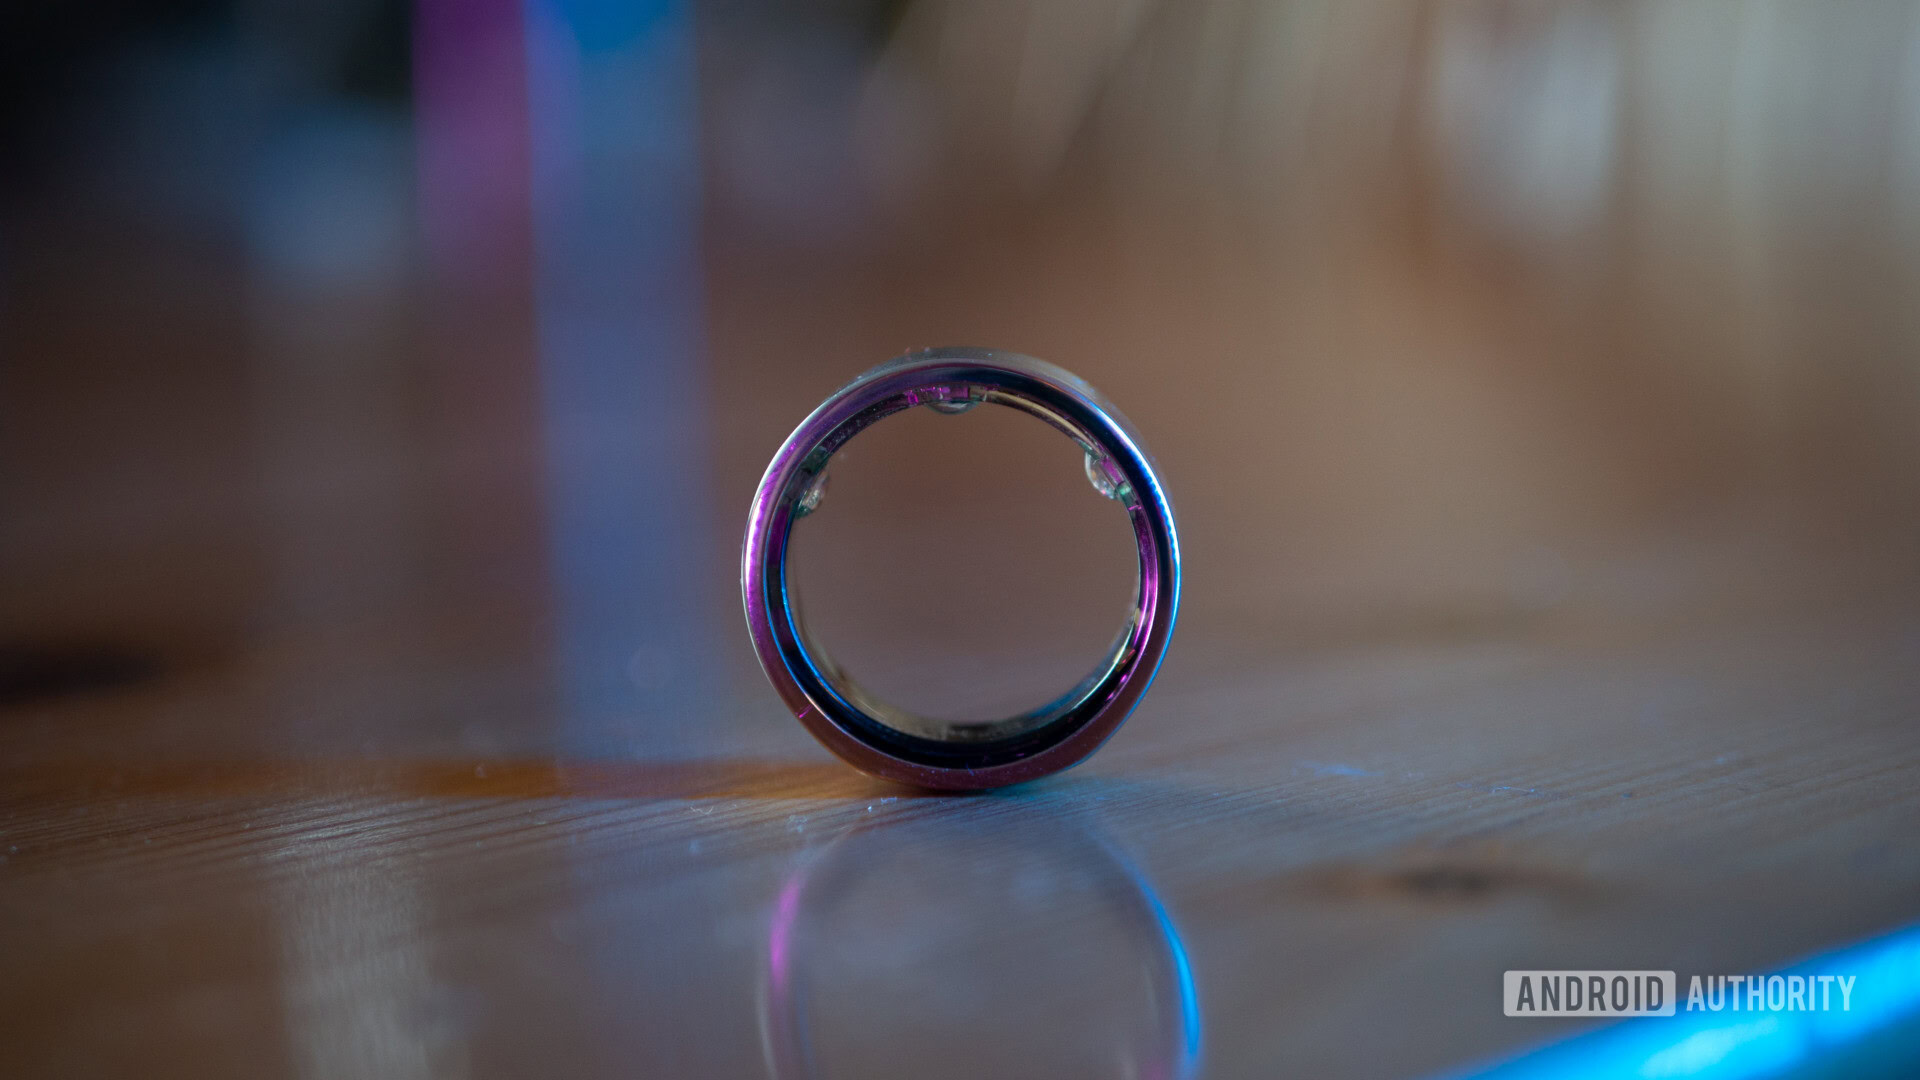 Supporting Healthcare With Connected Devices: Oura Ring